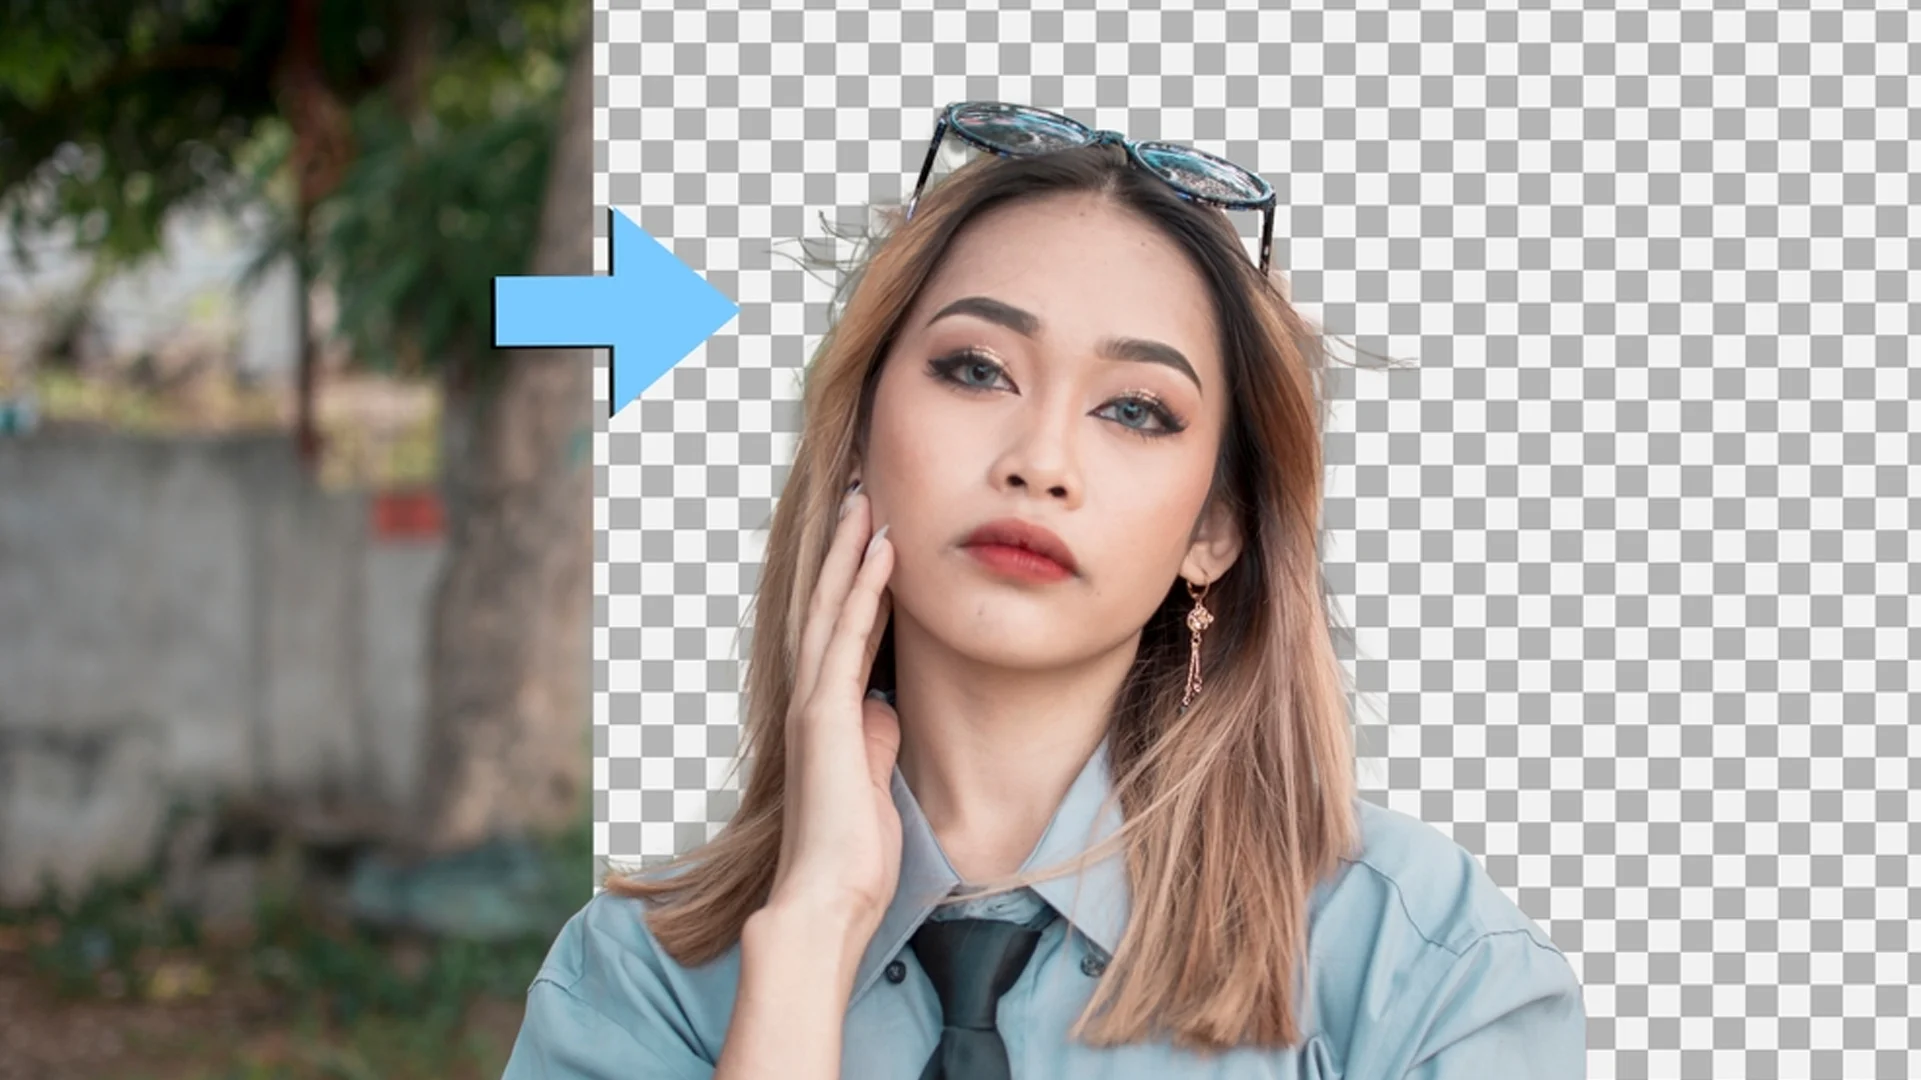 How To Remove The Background Of A Product Photo